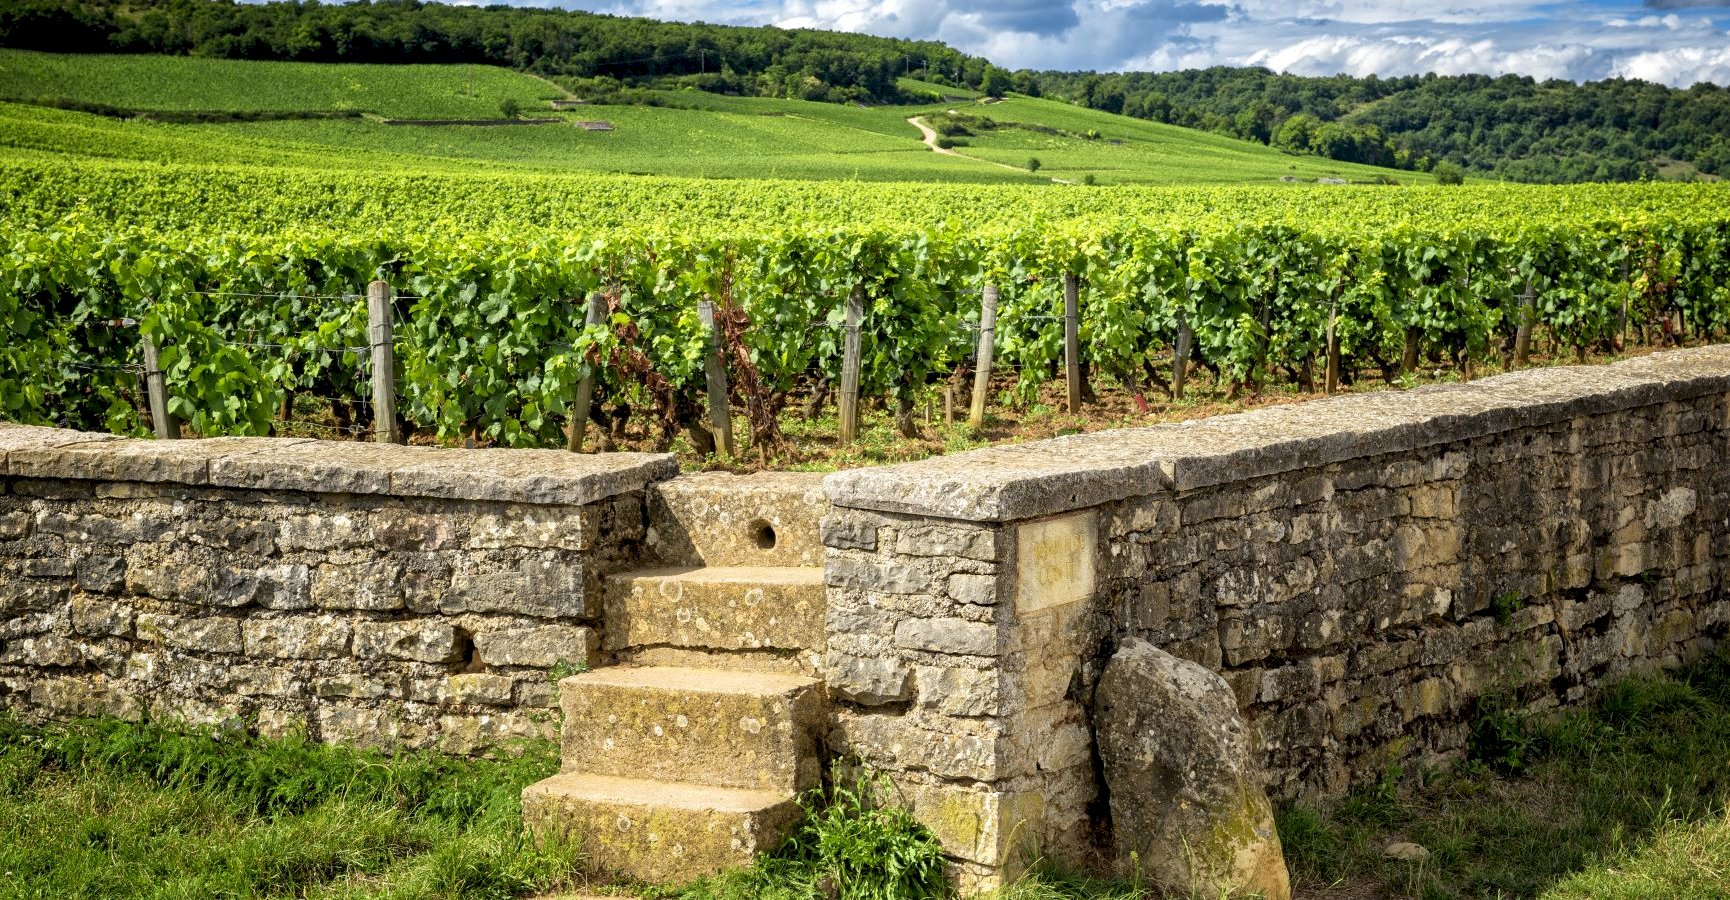 Ophorus Tours - 8 Days Alsace & Burgundy Small Group Private Travel Package - 3* Hotel Option